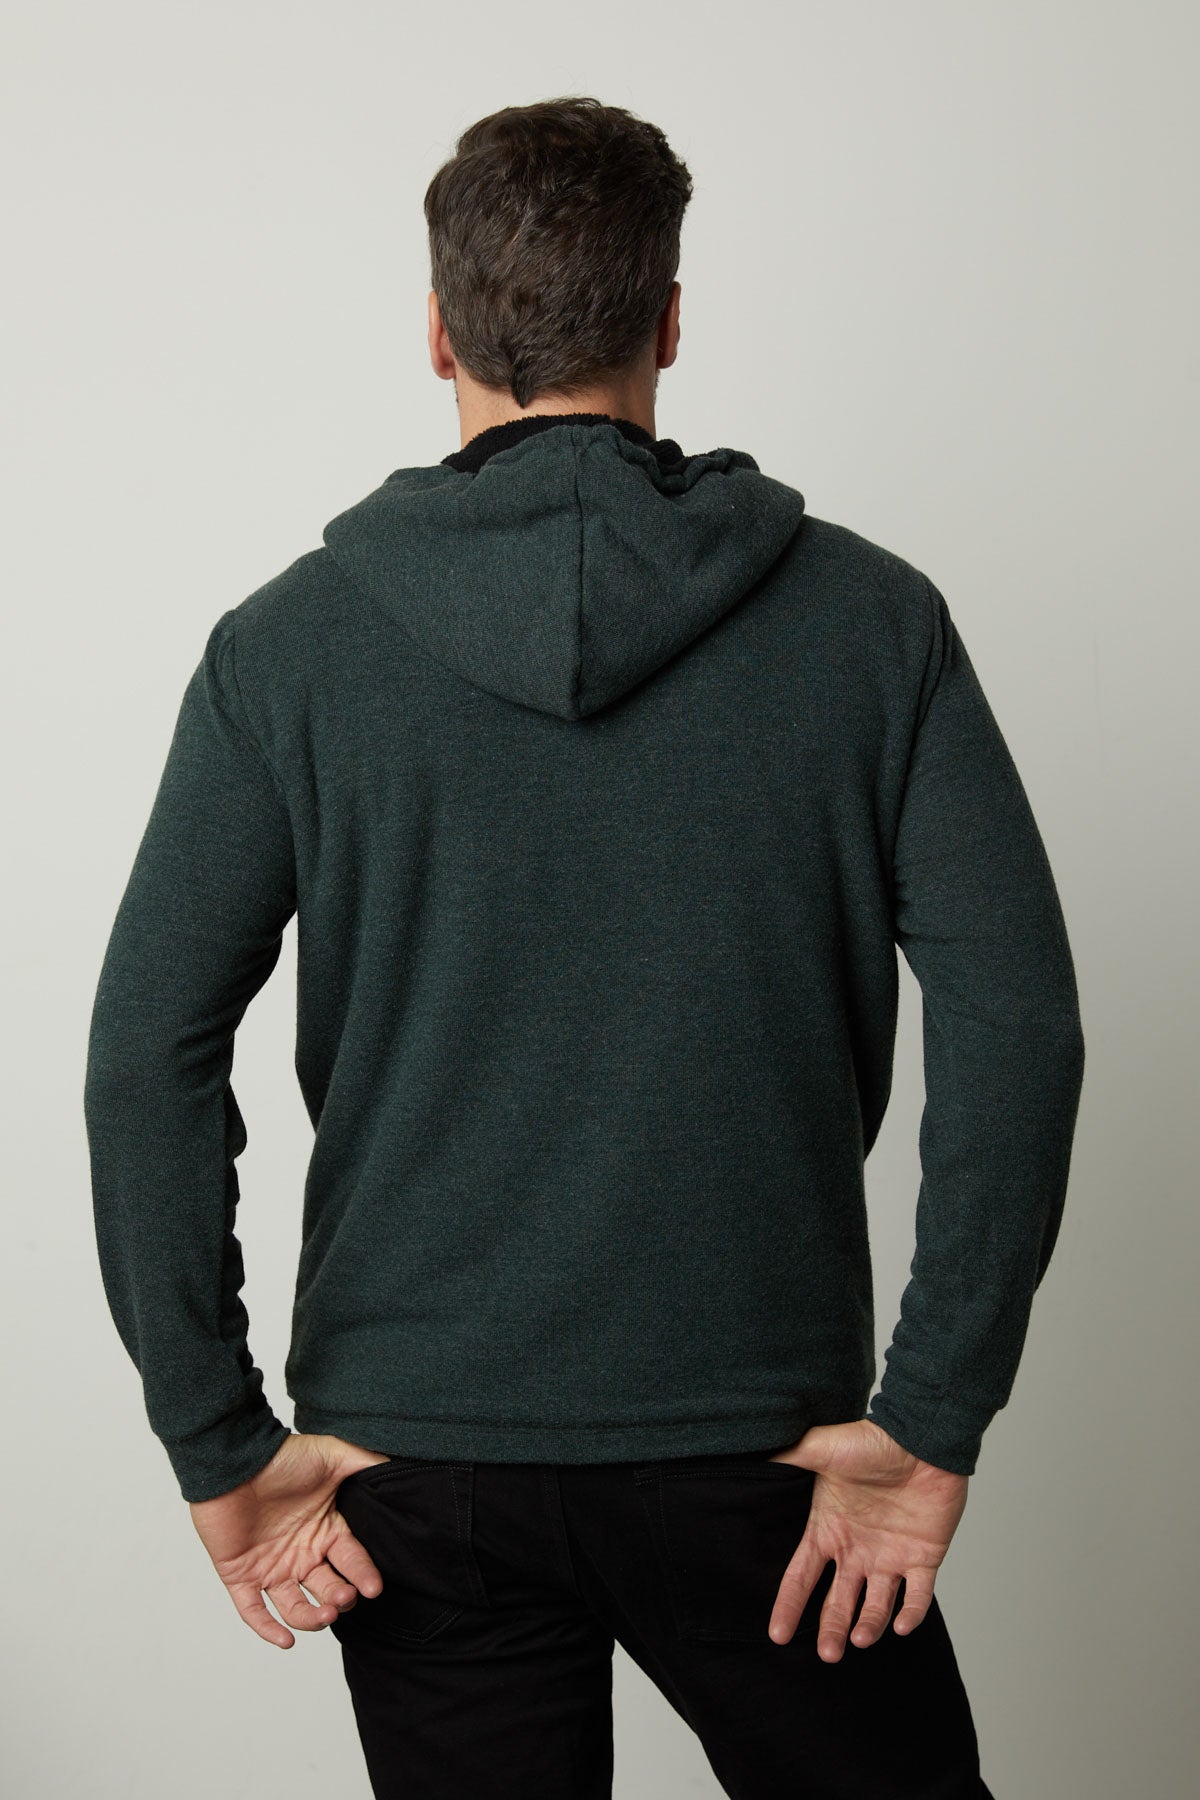   The back view of a man wearing Velvet by Graham & Spencer's SALVADORE SHERPA LINED HOODIE with an adjustable drawstring hood. 